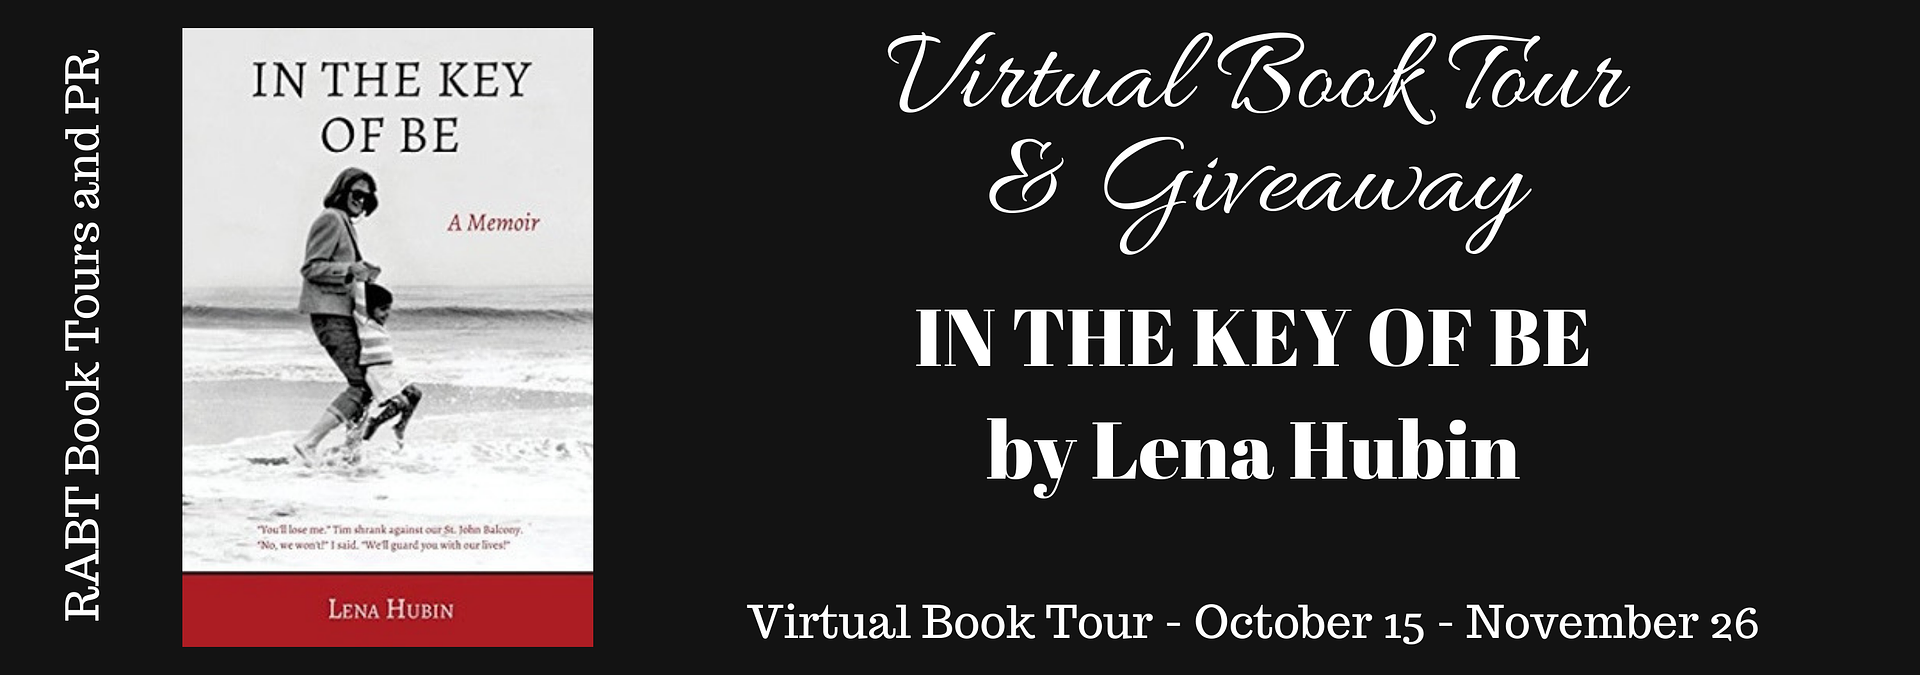 Virtual Book Tour: In the Key of Be by Lena Hubin #interview @RABTBookTours #giveaway